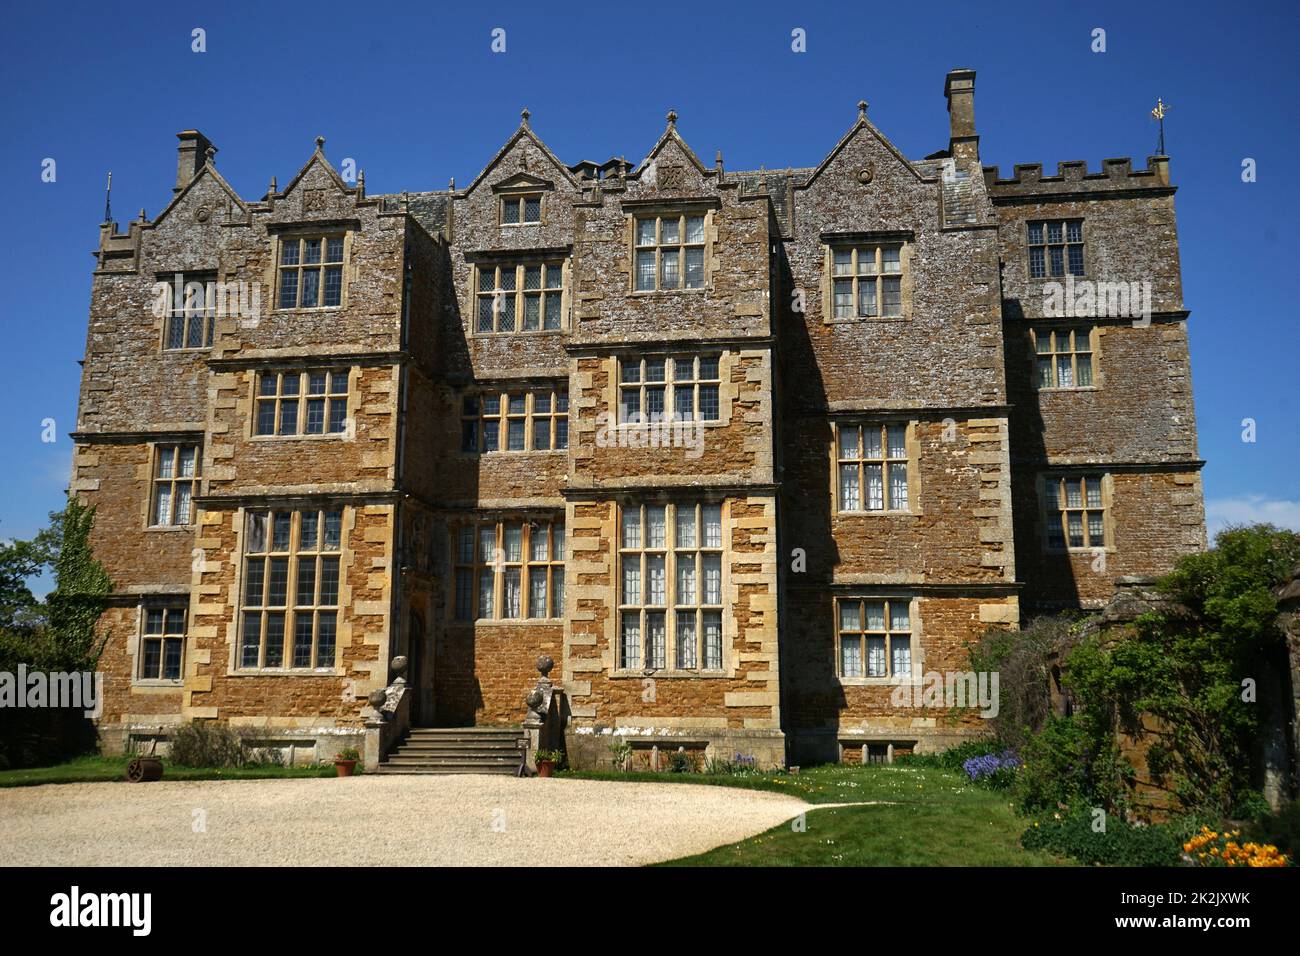 Chastleton House, Jacobean country house and gardens, situated at Chastleton near Moreton-in-Marsh, Oxfordshire, England Stock Photo